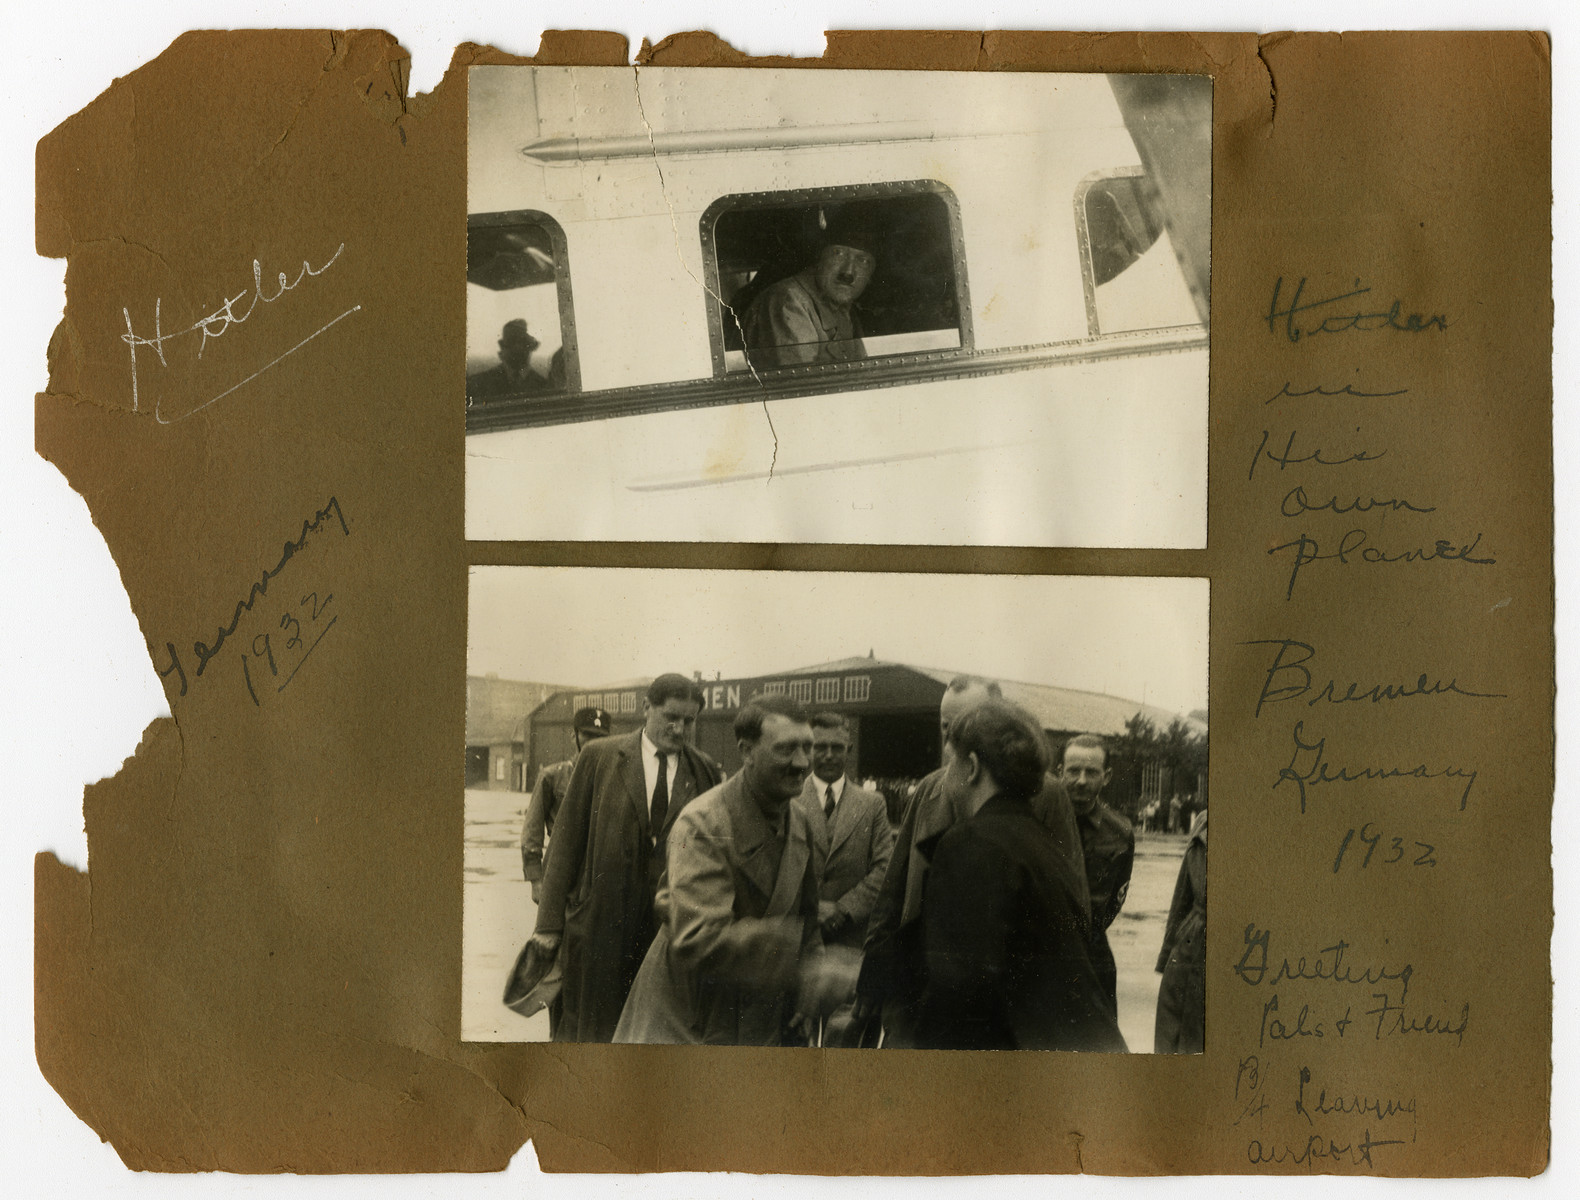 Album page with Adolf Hitler as he greets friends in Bremen, Germany airport, 1932

Original caption on album page reads, "Hitler. Germany 1932." Caption for top-most photo reads, "Hitler in his own plane." Caption for the bottom-most photo reads, "Bremen, Germany. 1932. Greeting pals & friends before leaving airport."